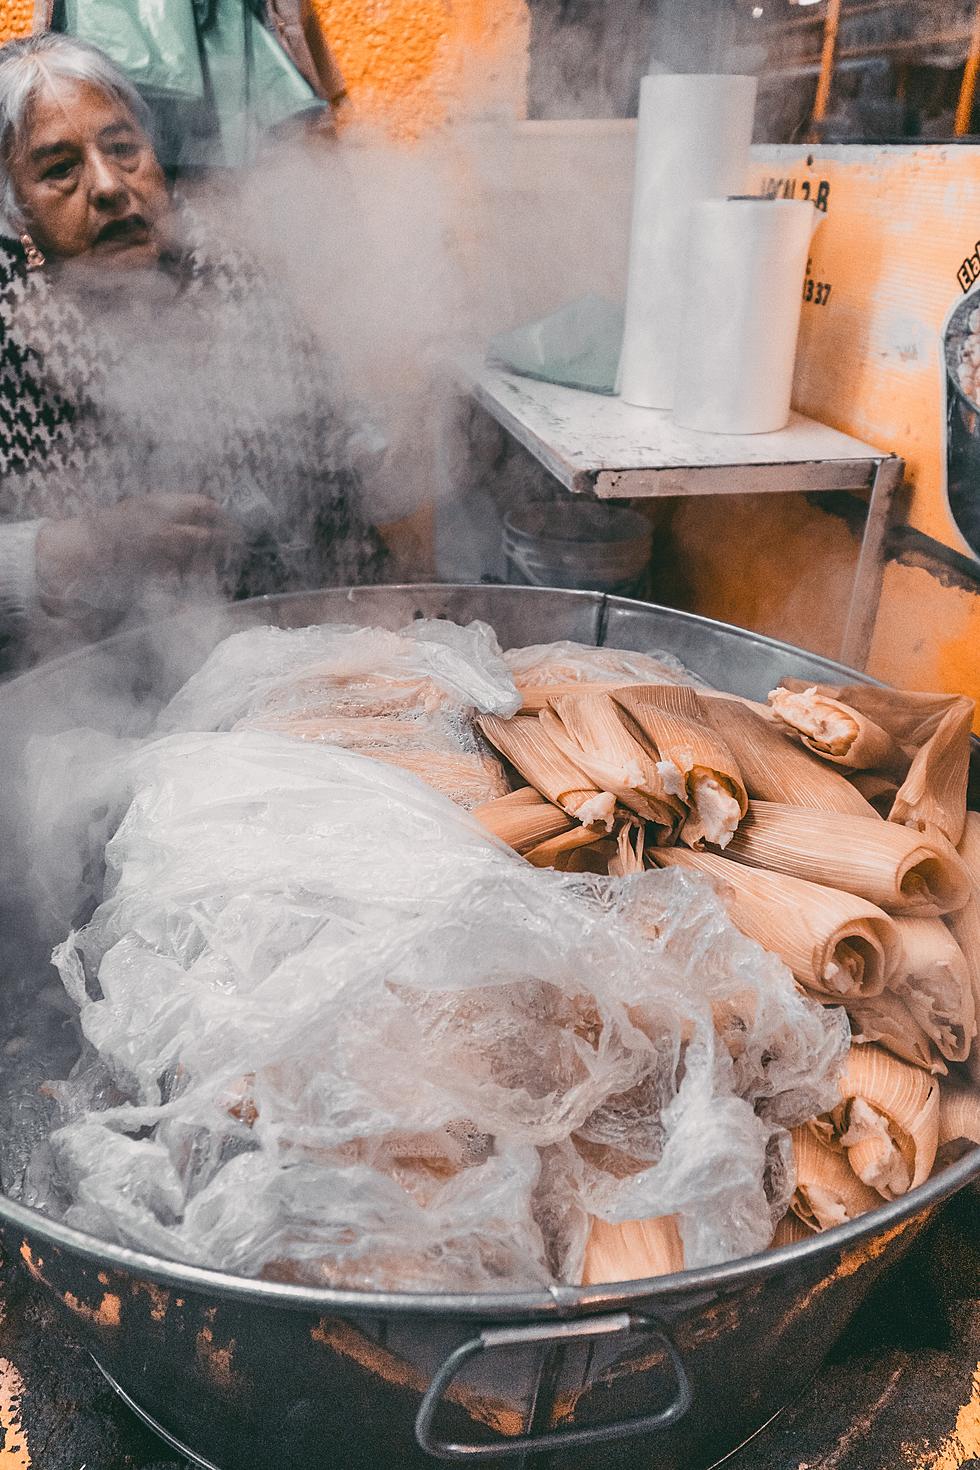 Help Settle The Debate:Are Tamales Just A Texas Thing?